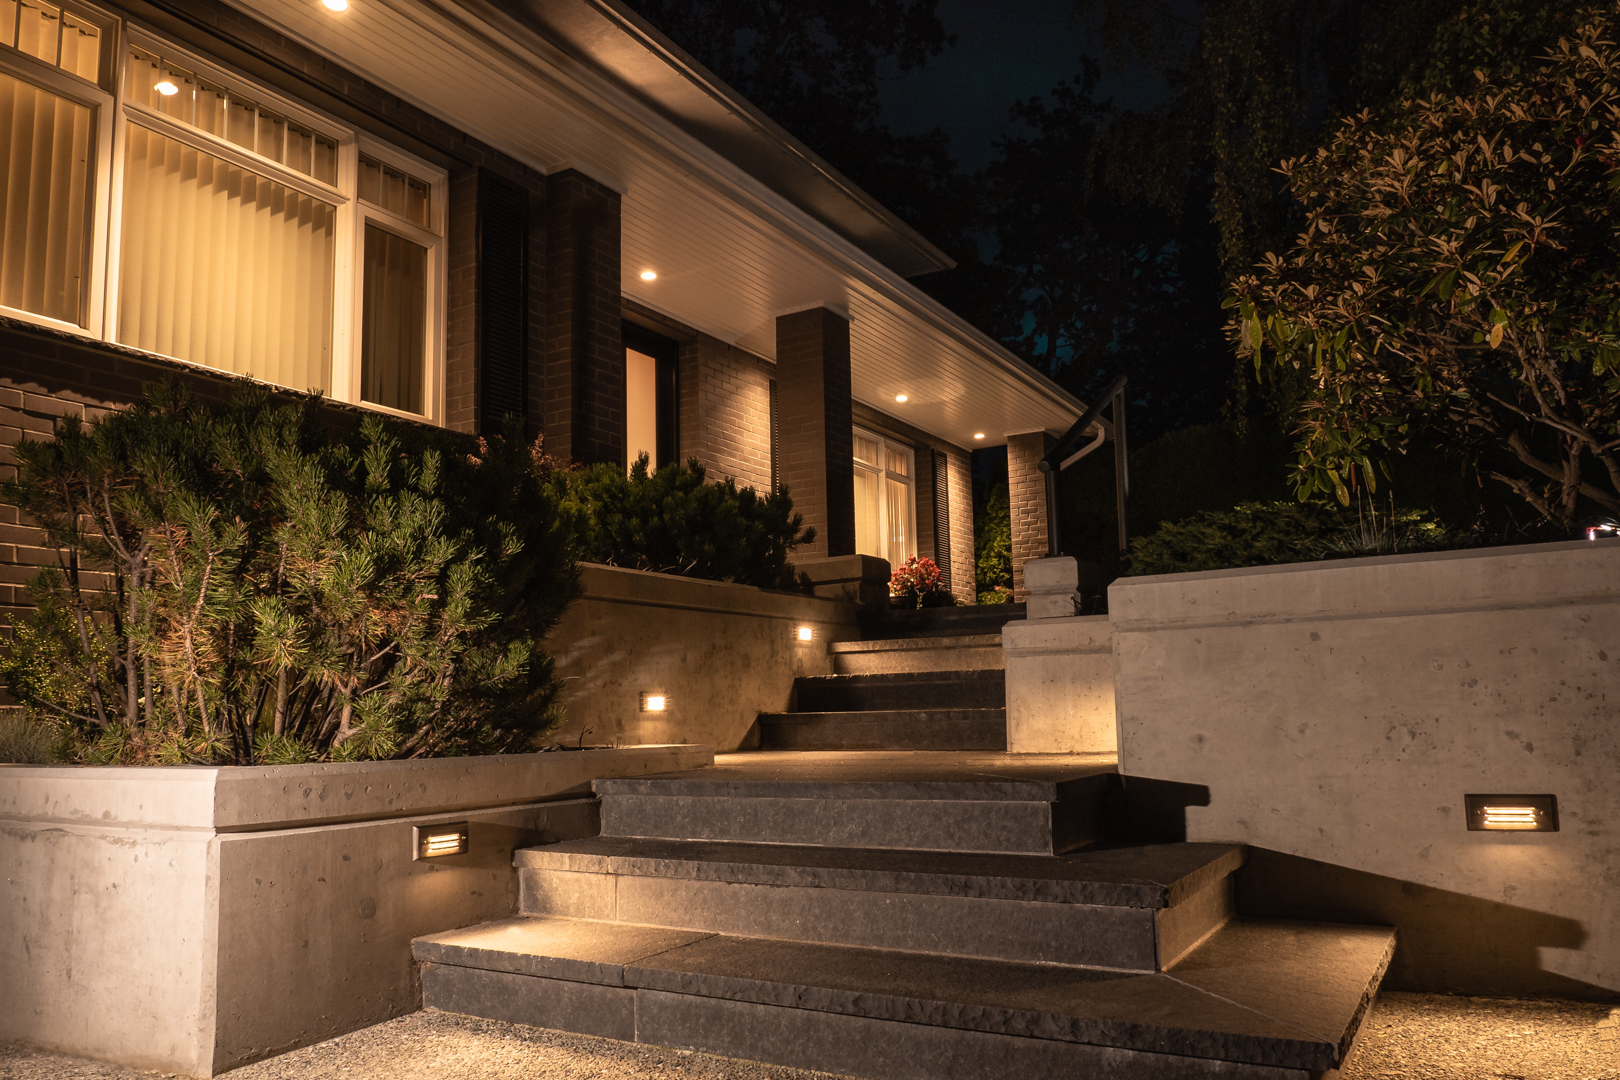 Stone steps leading up to house at night